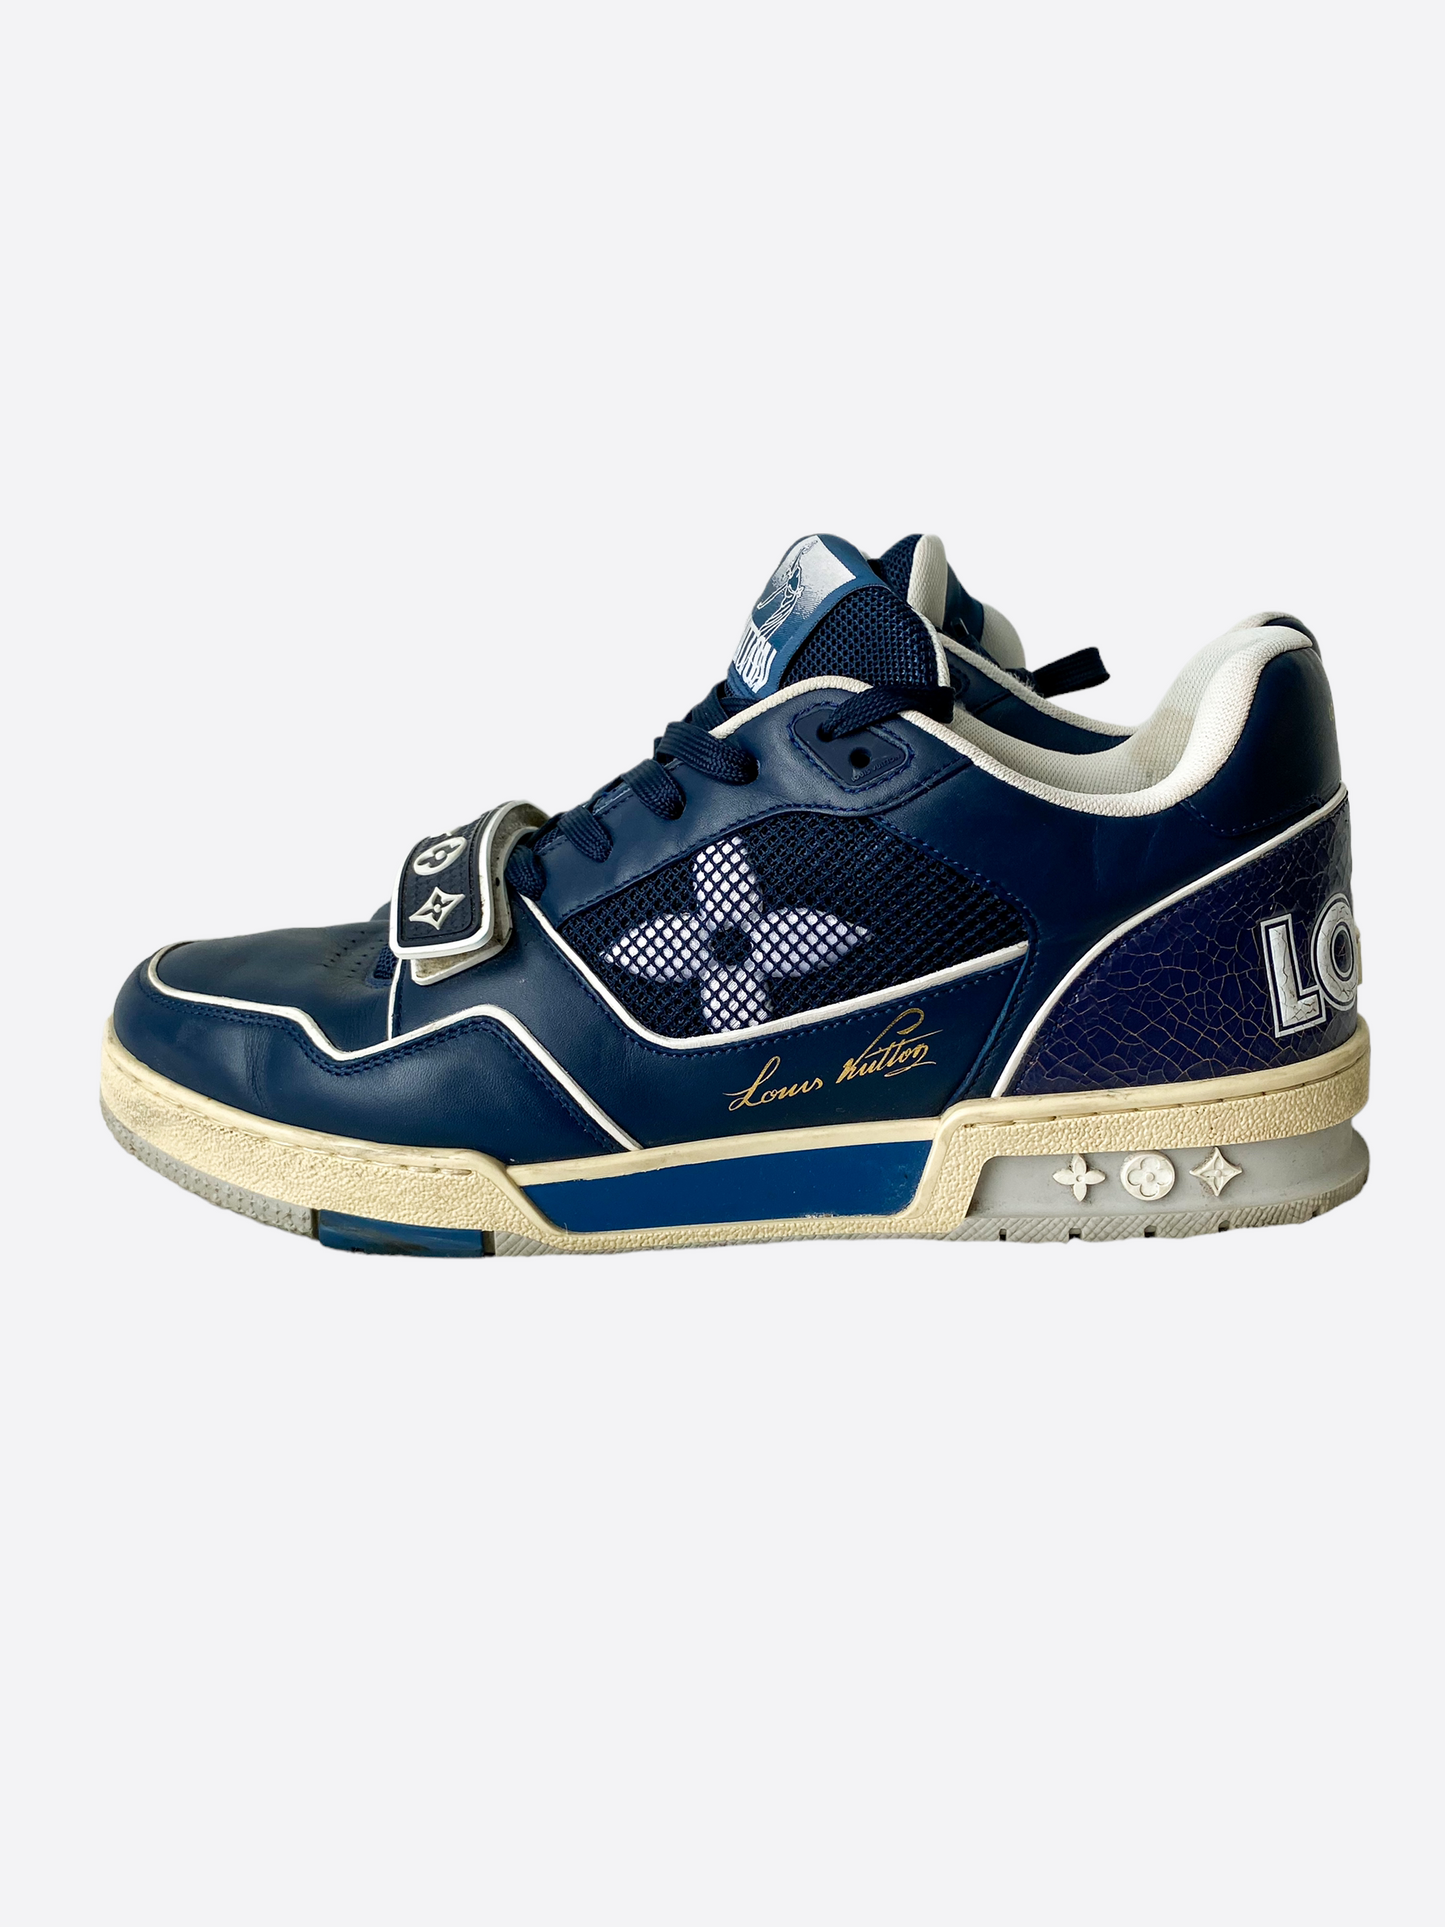 Exclusive NEW YORK trainer. That is all I know so far. #lv #lvmen